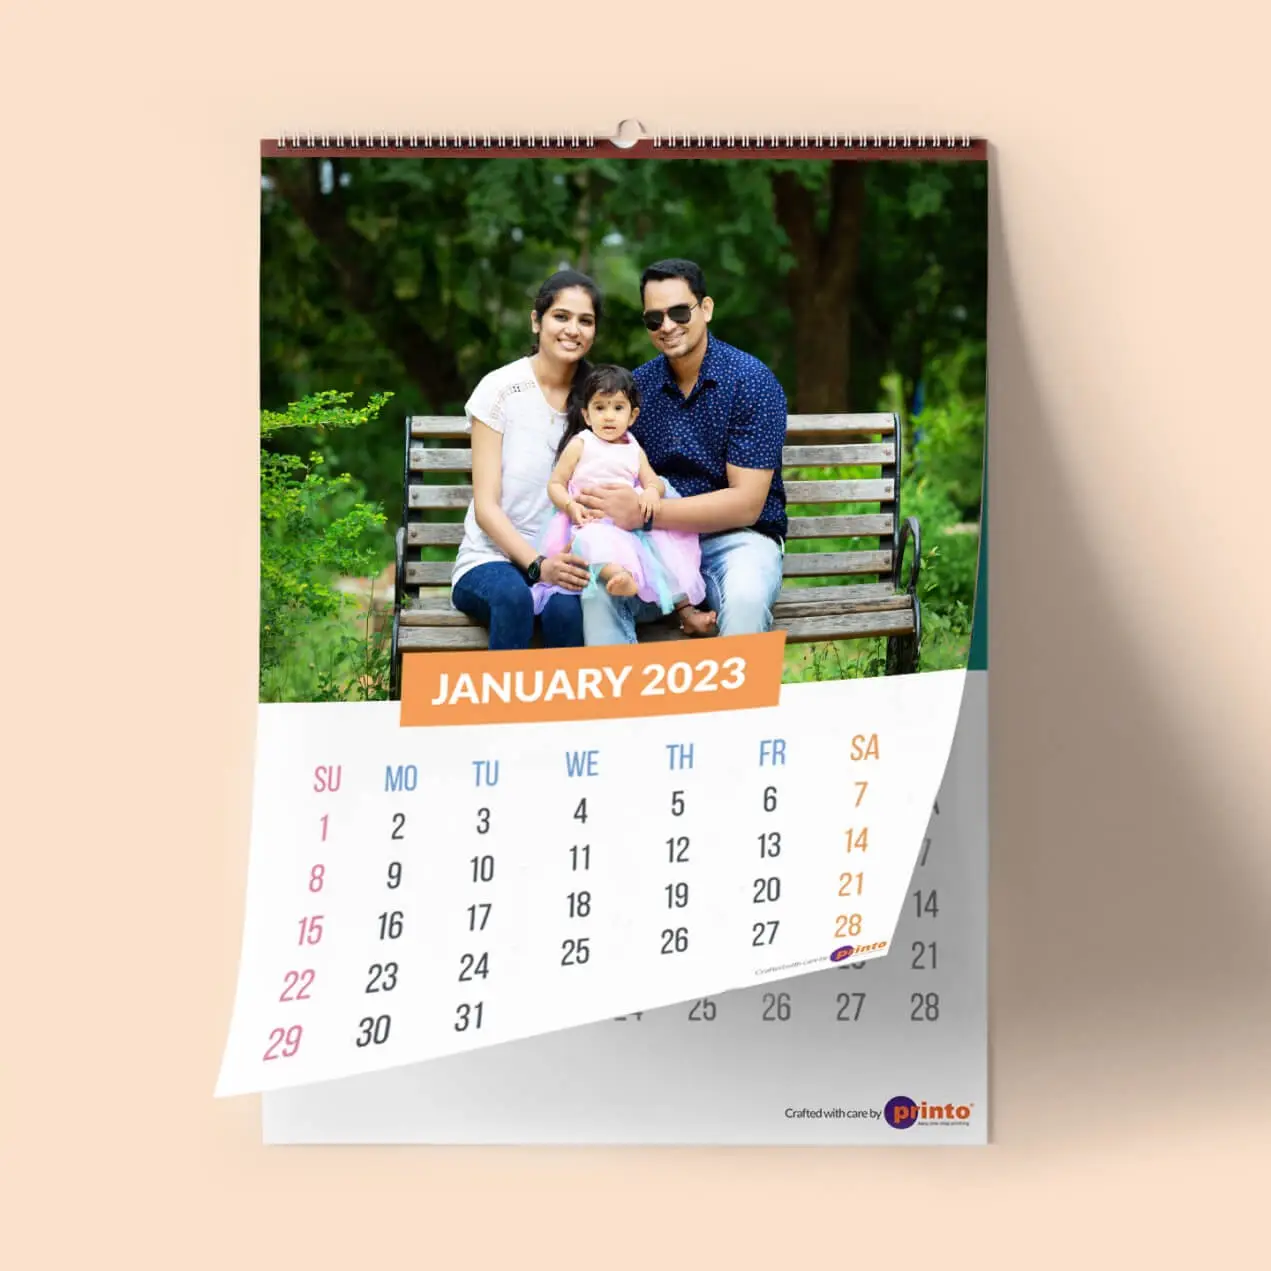 Express Delivery Personalized Wall Calendar